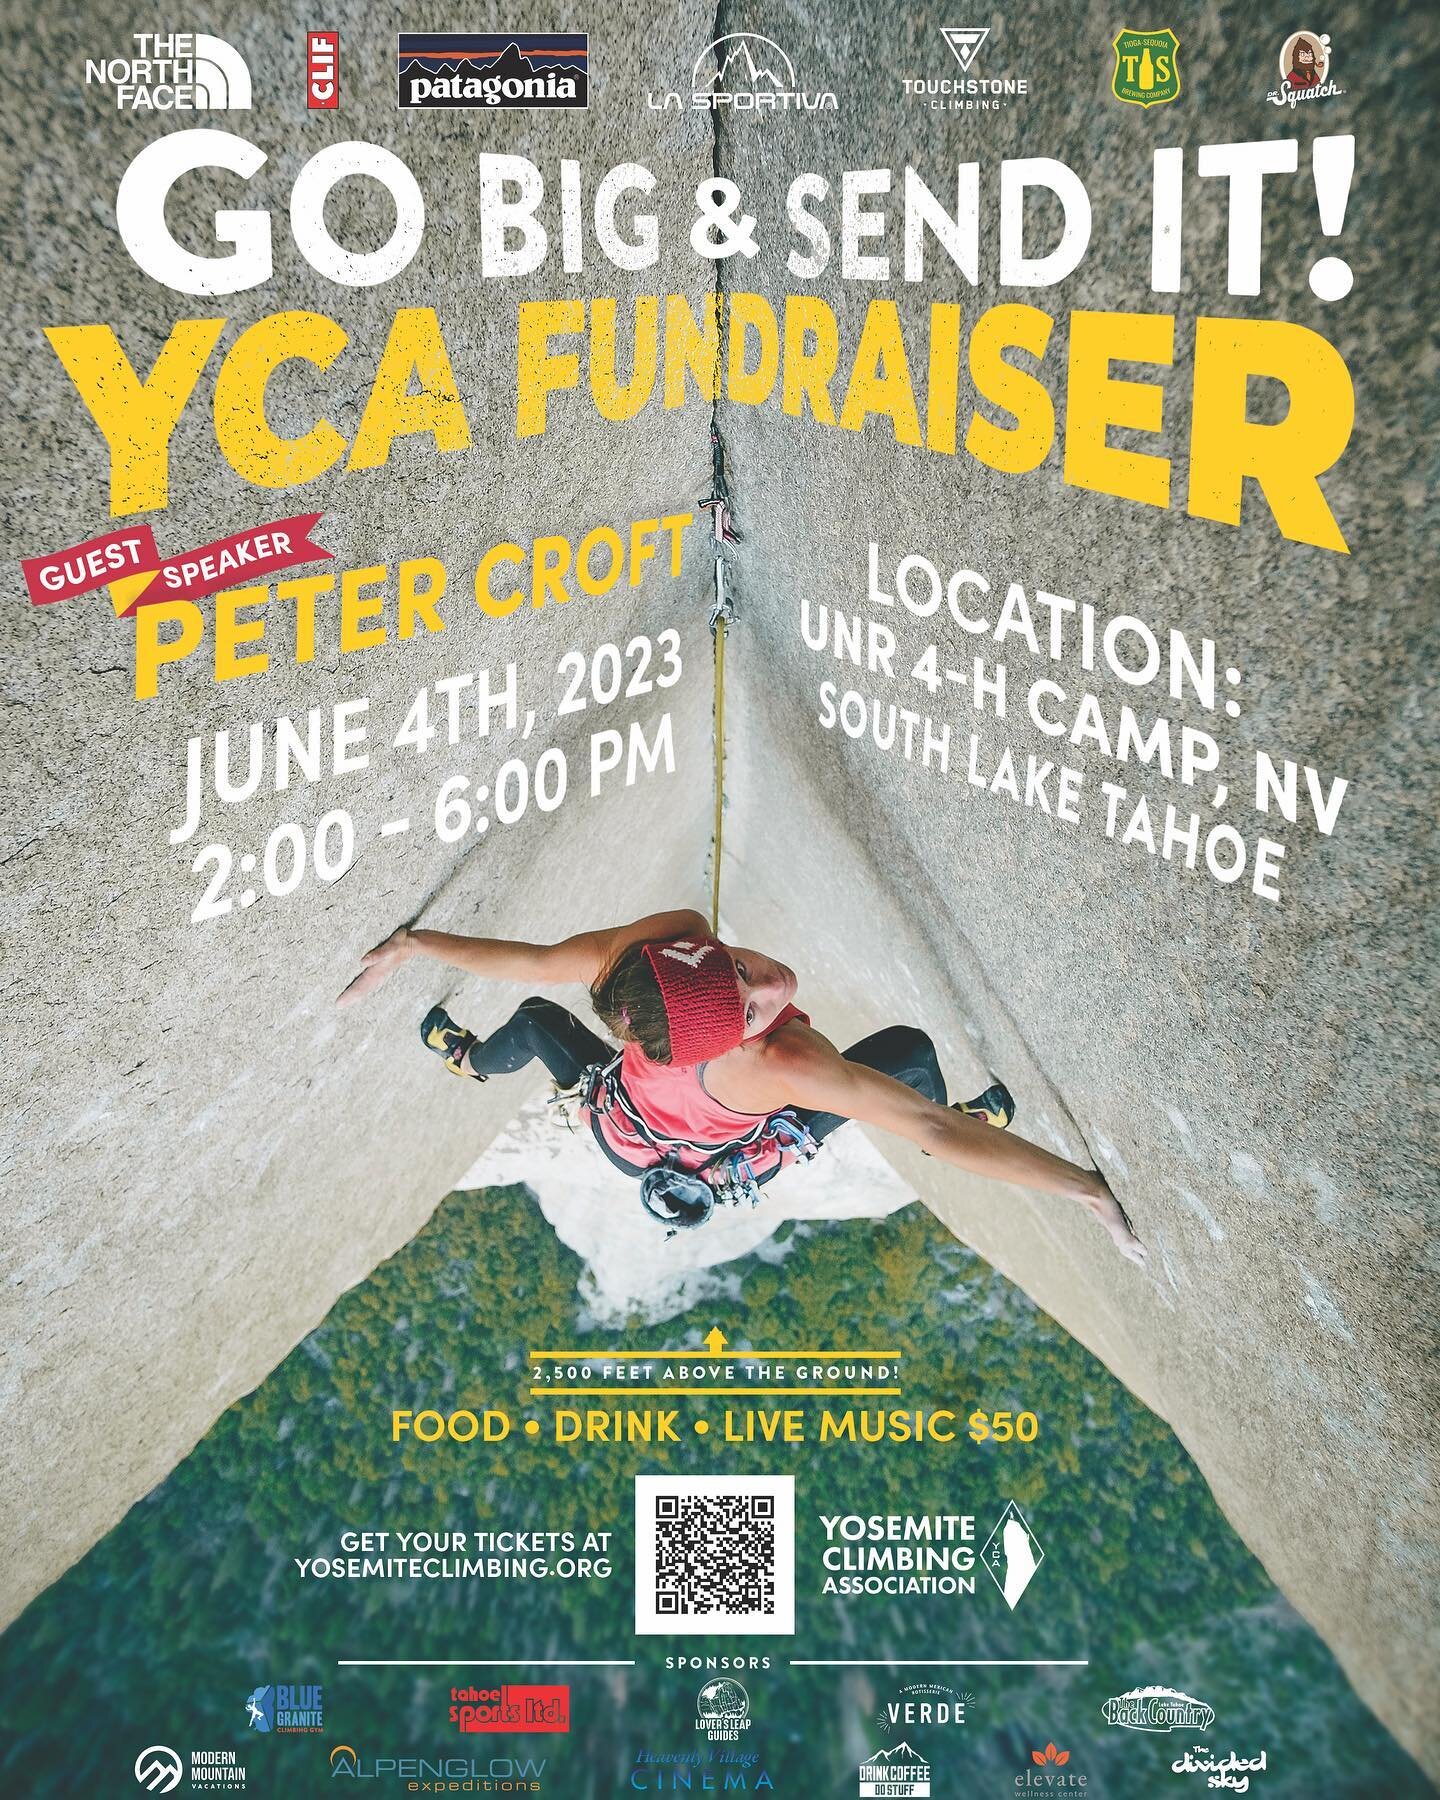 The Yosemite Climbing Association (YCA) @yosemiteclimbingassociation is celebrating their 3rd annual fundraising event and YOU are invited! (tickets linked in  bio) June 4th, 2pm - 6pm in South Lake Tahoe, NV.
Food, drink, fun, as well as live music,